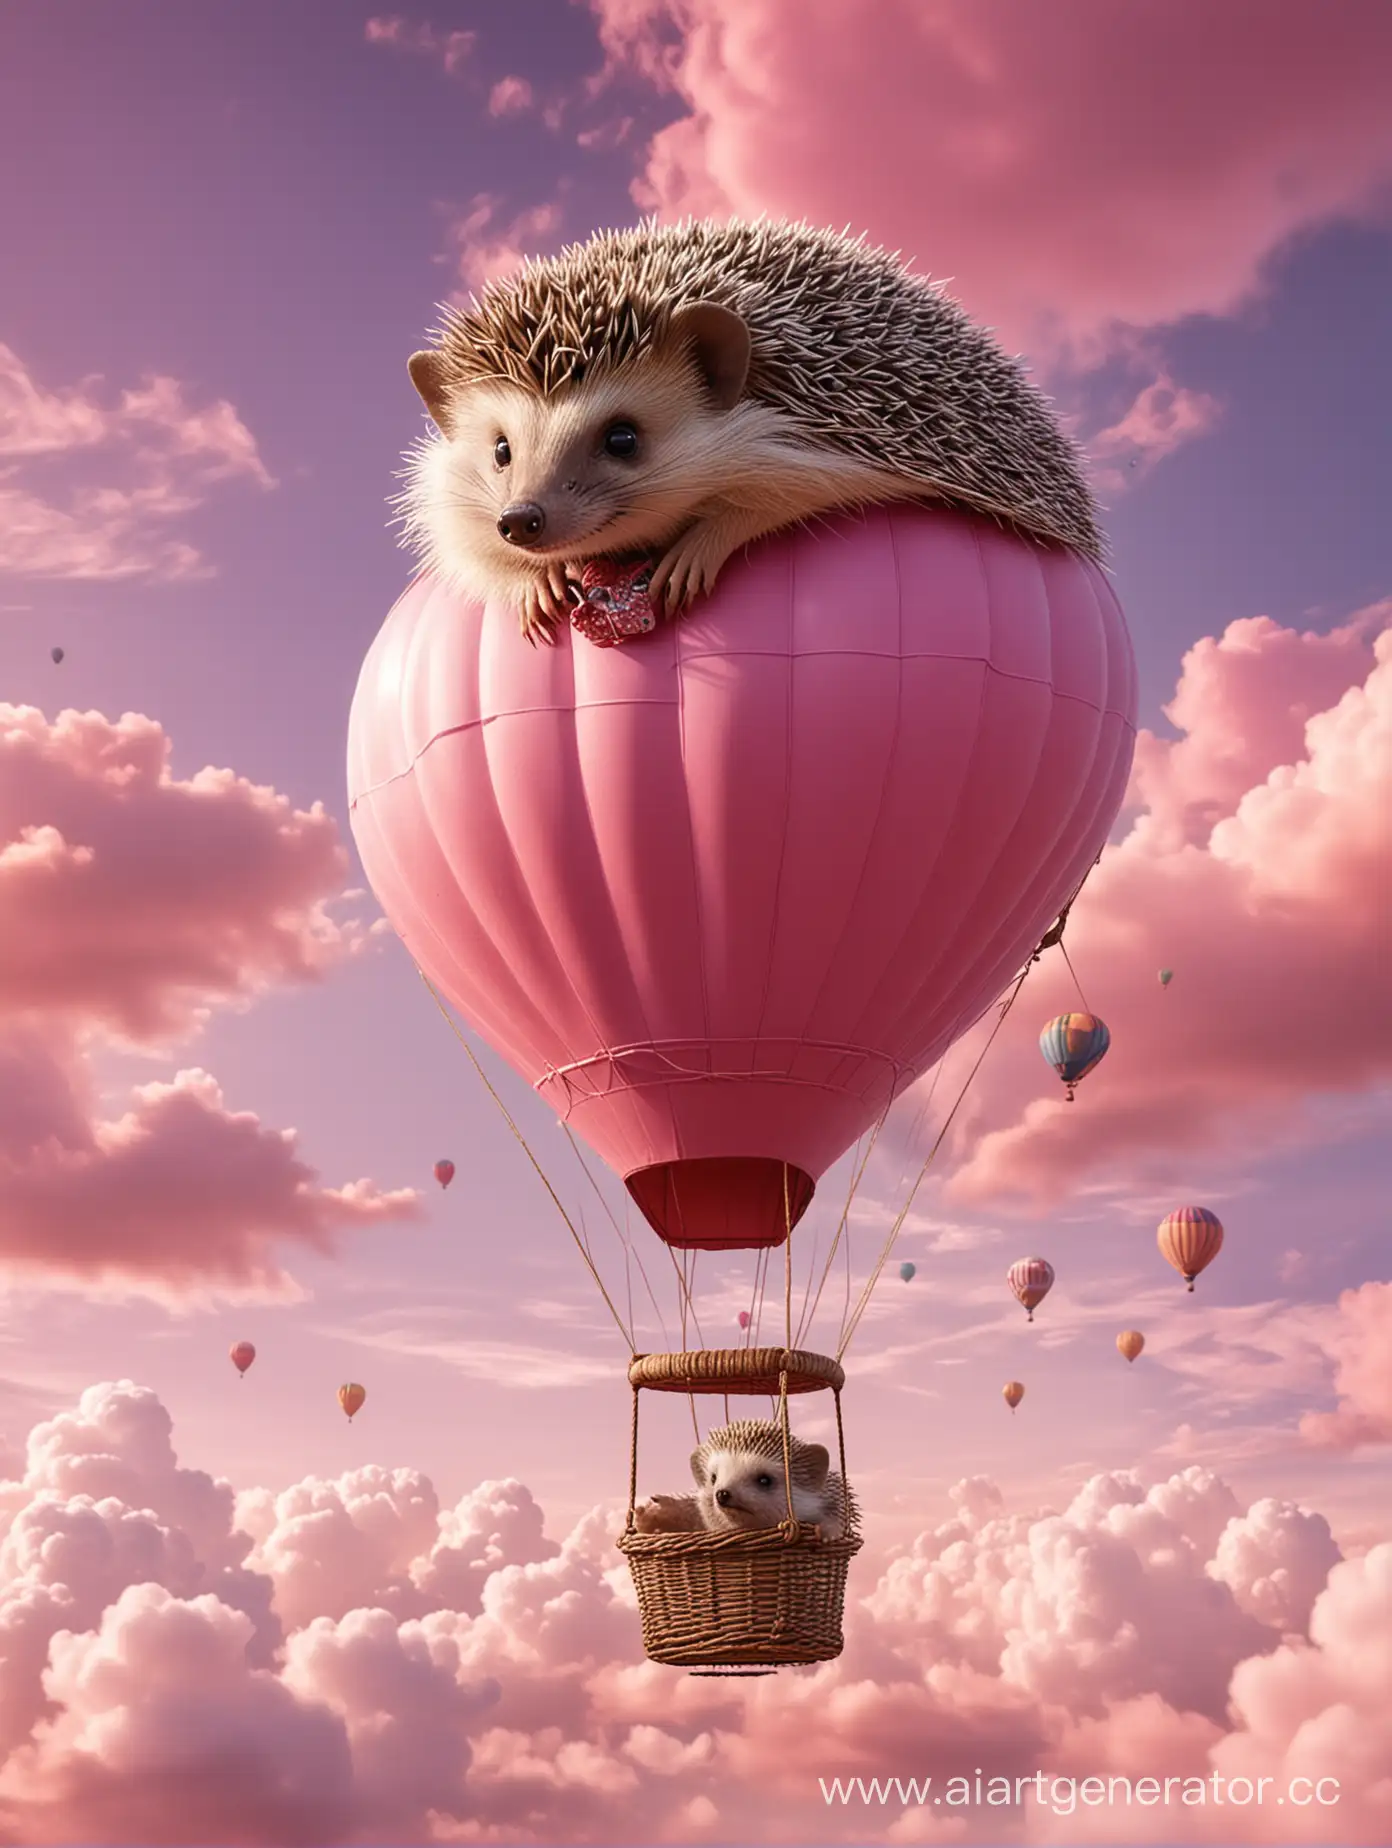 Hedgehog-Flying-on-Hot-Air-Balloon-under-Pink-Clouds